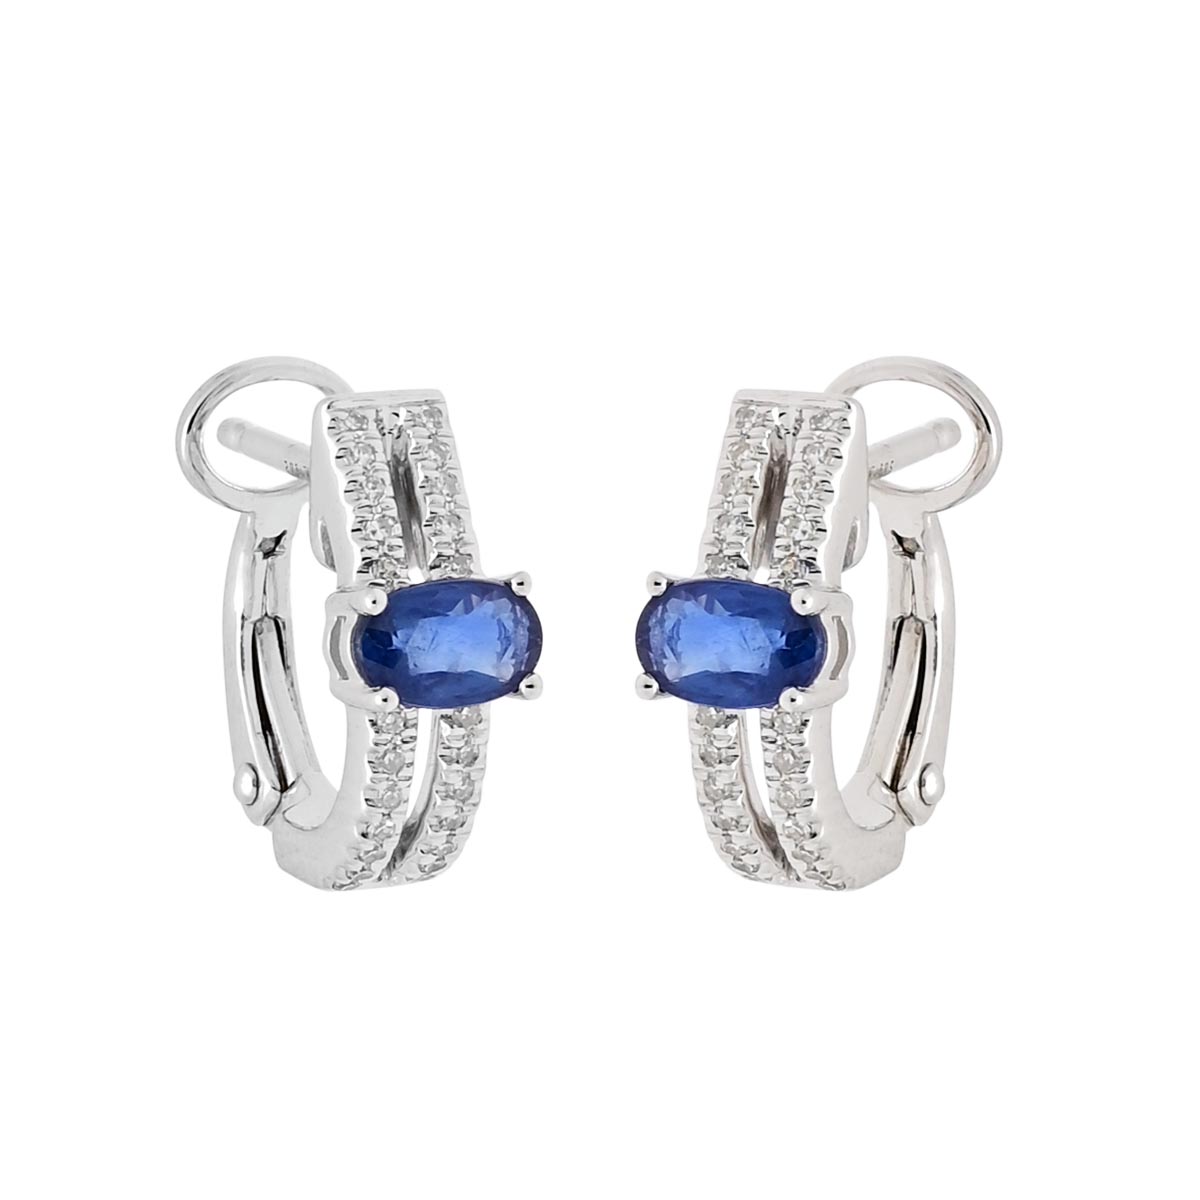 Dabakarov Oval Sapphire Hoop Earrings in 14kt White Gold with Diamonds (1/10ct tw)